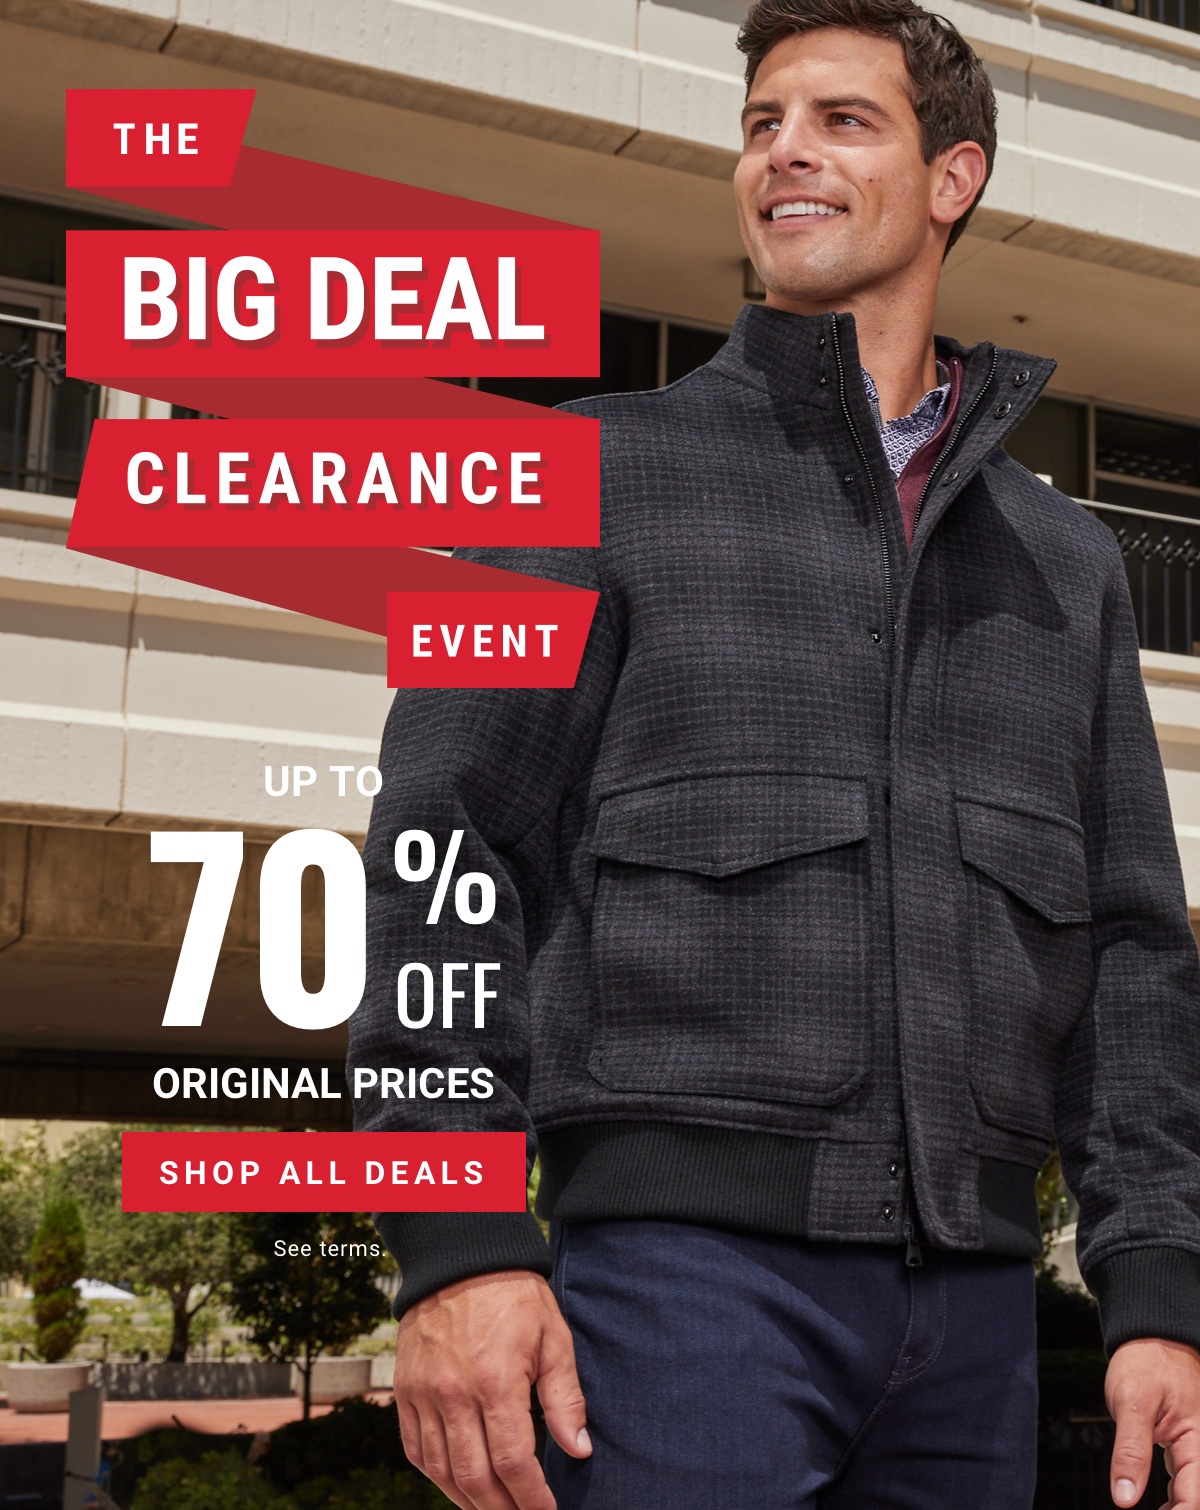 The Big Deal Clearance Event | Up to 70% Off Original Prices